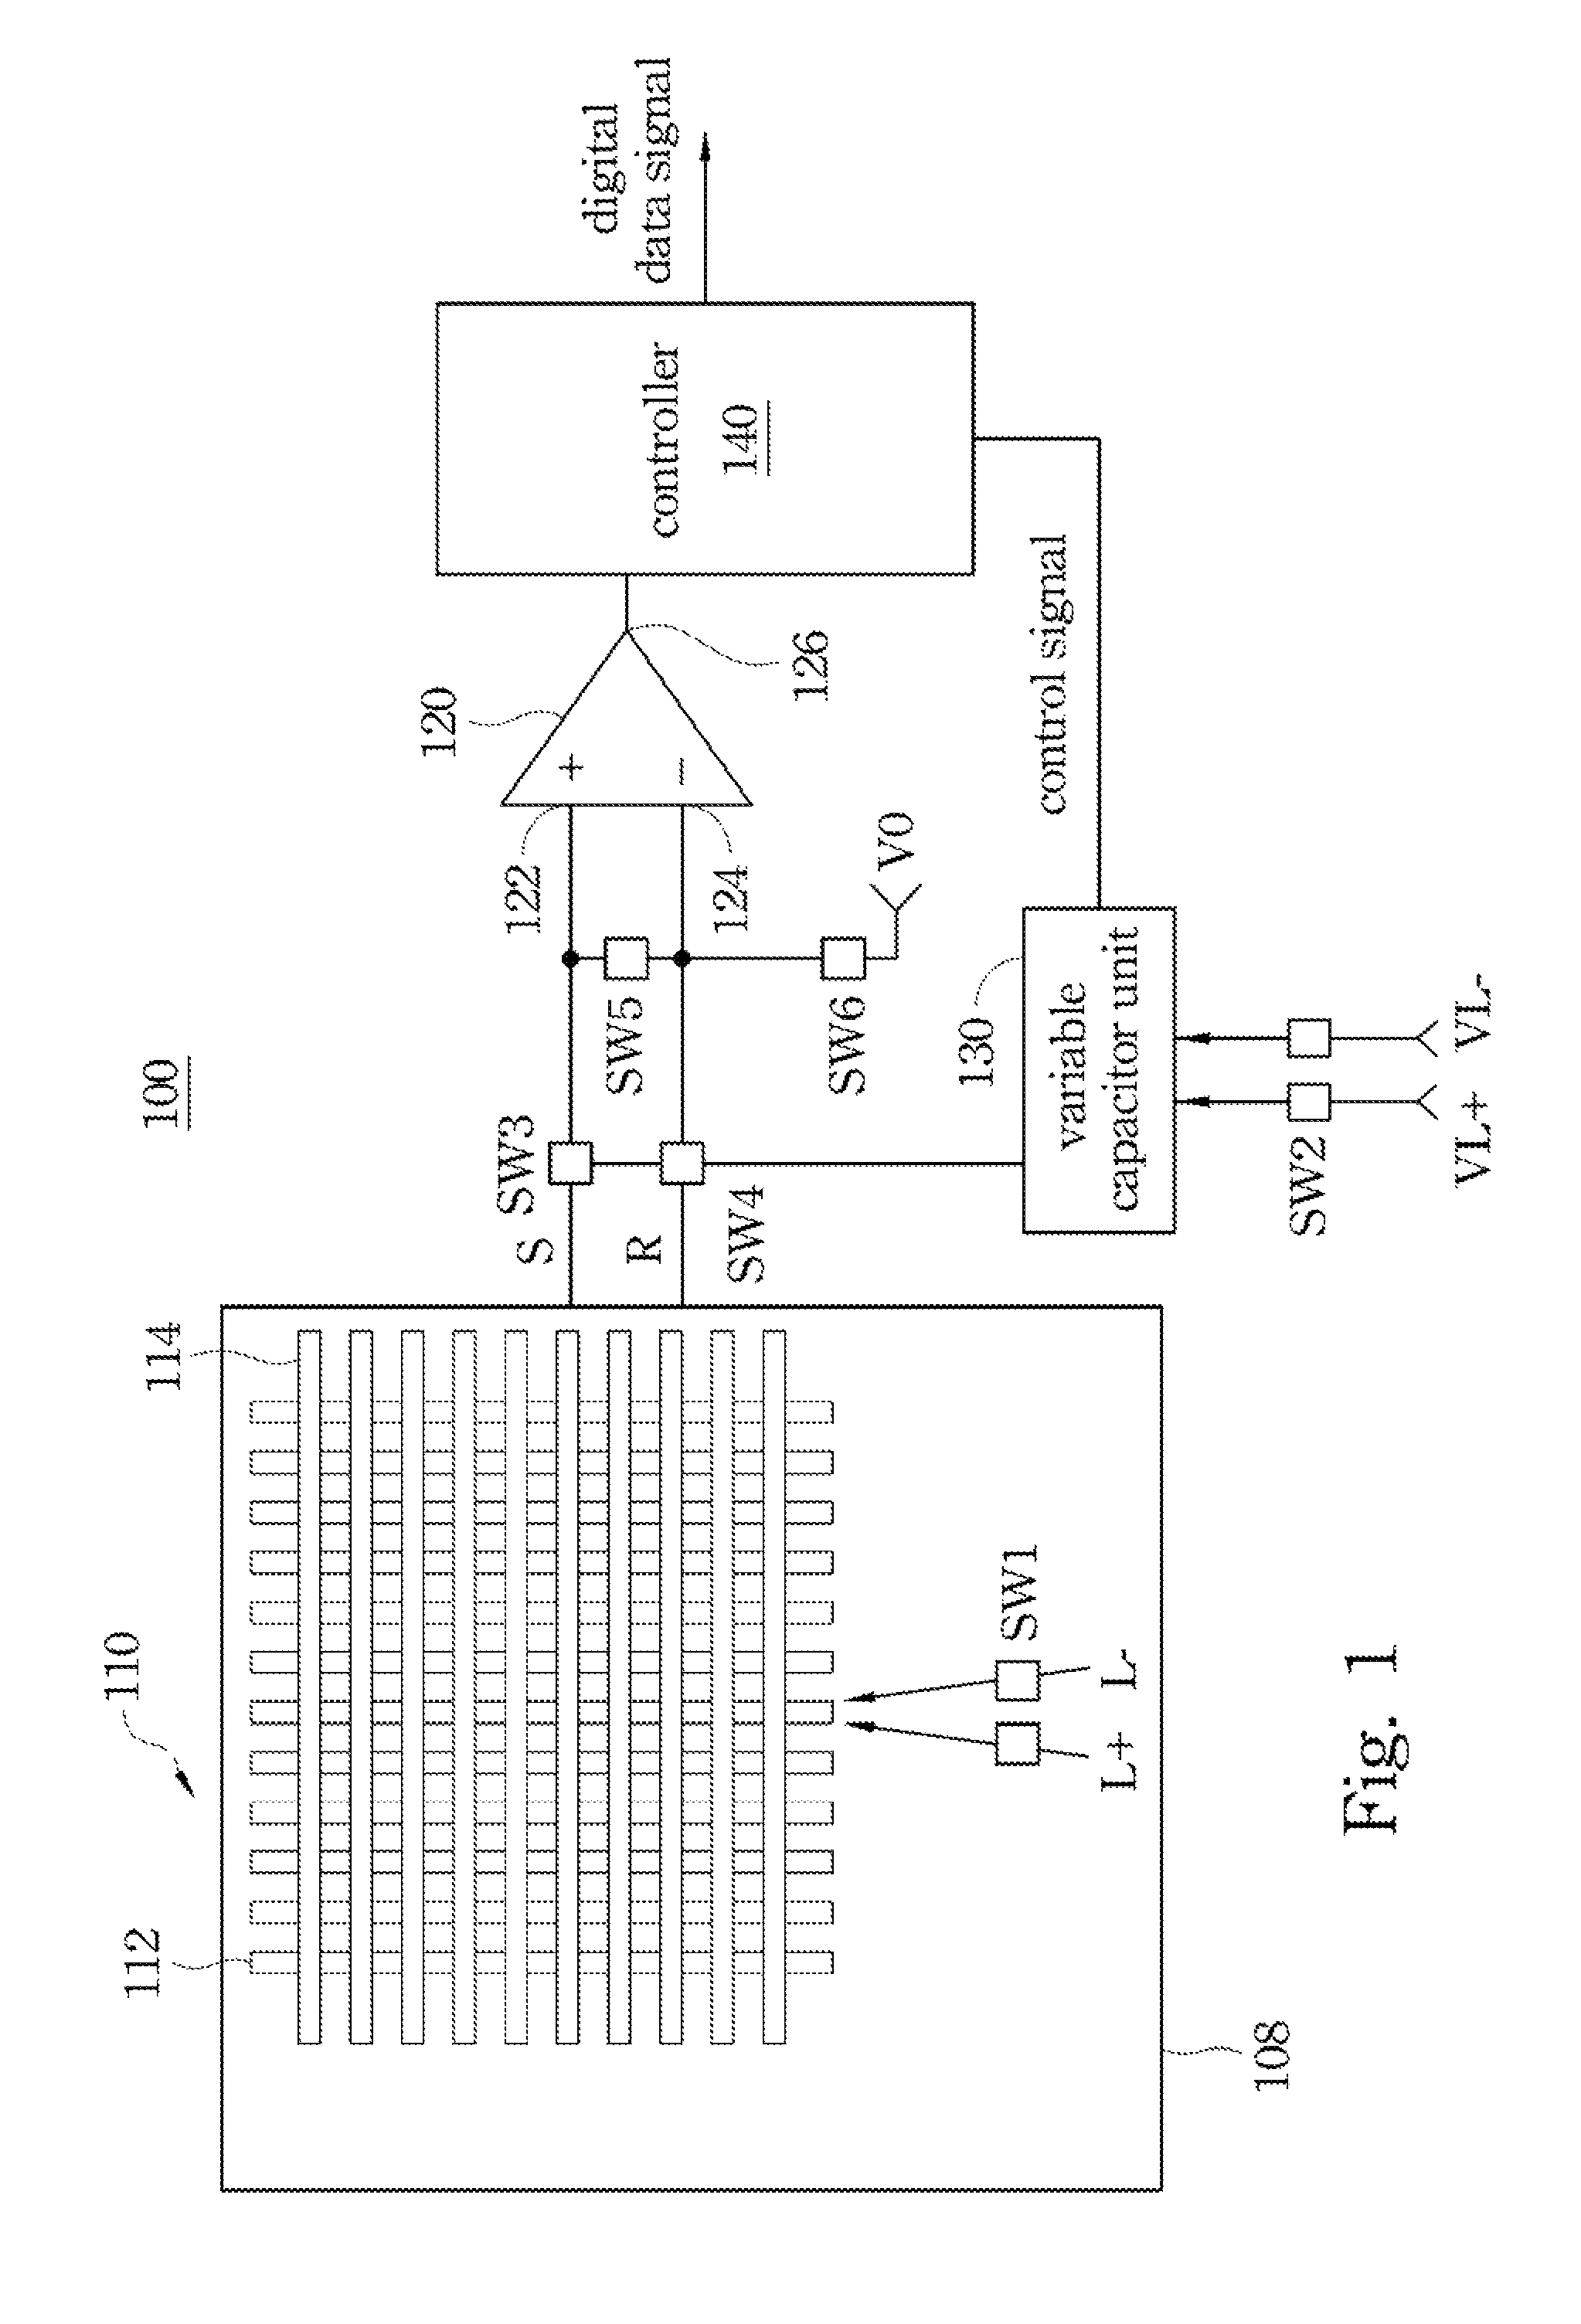 Touch sensing device